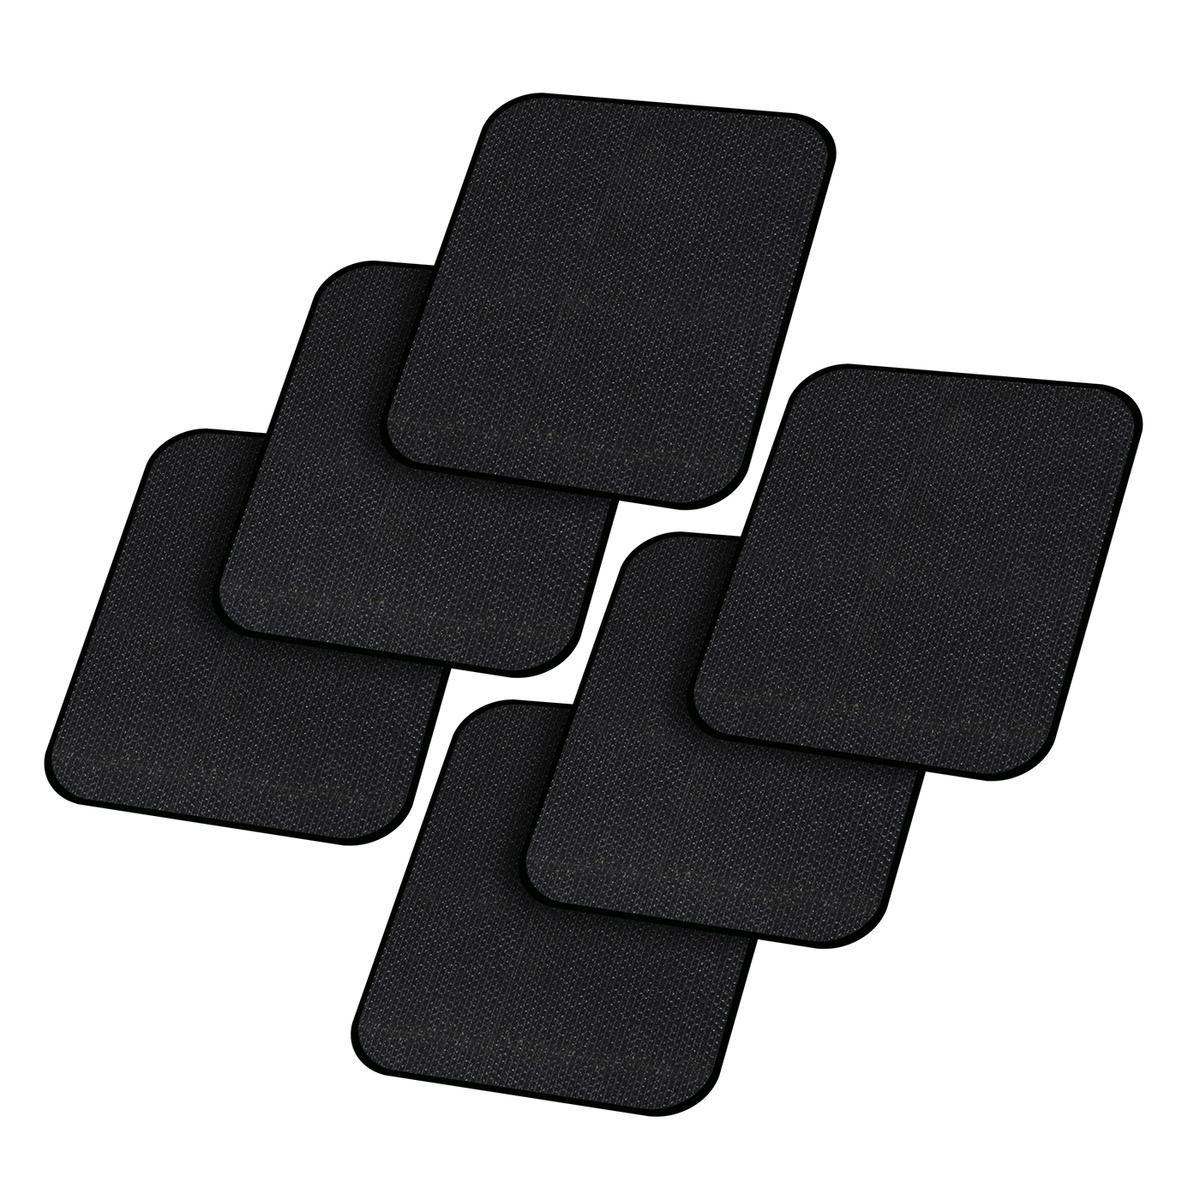 ActionHeat Adhesive Pads For Jacket Insert - 6 Pack - Back